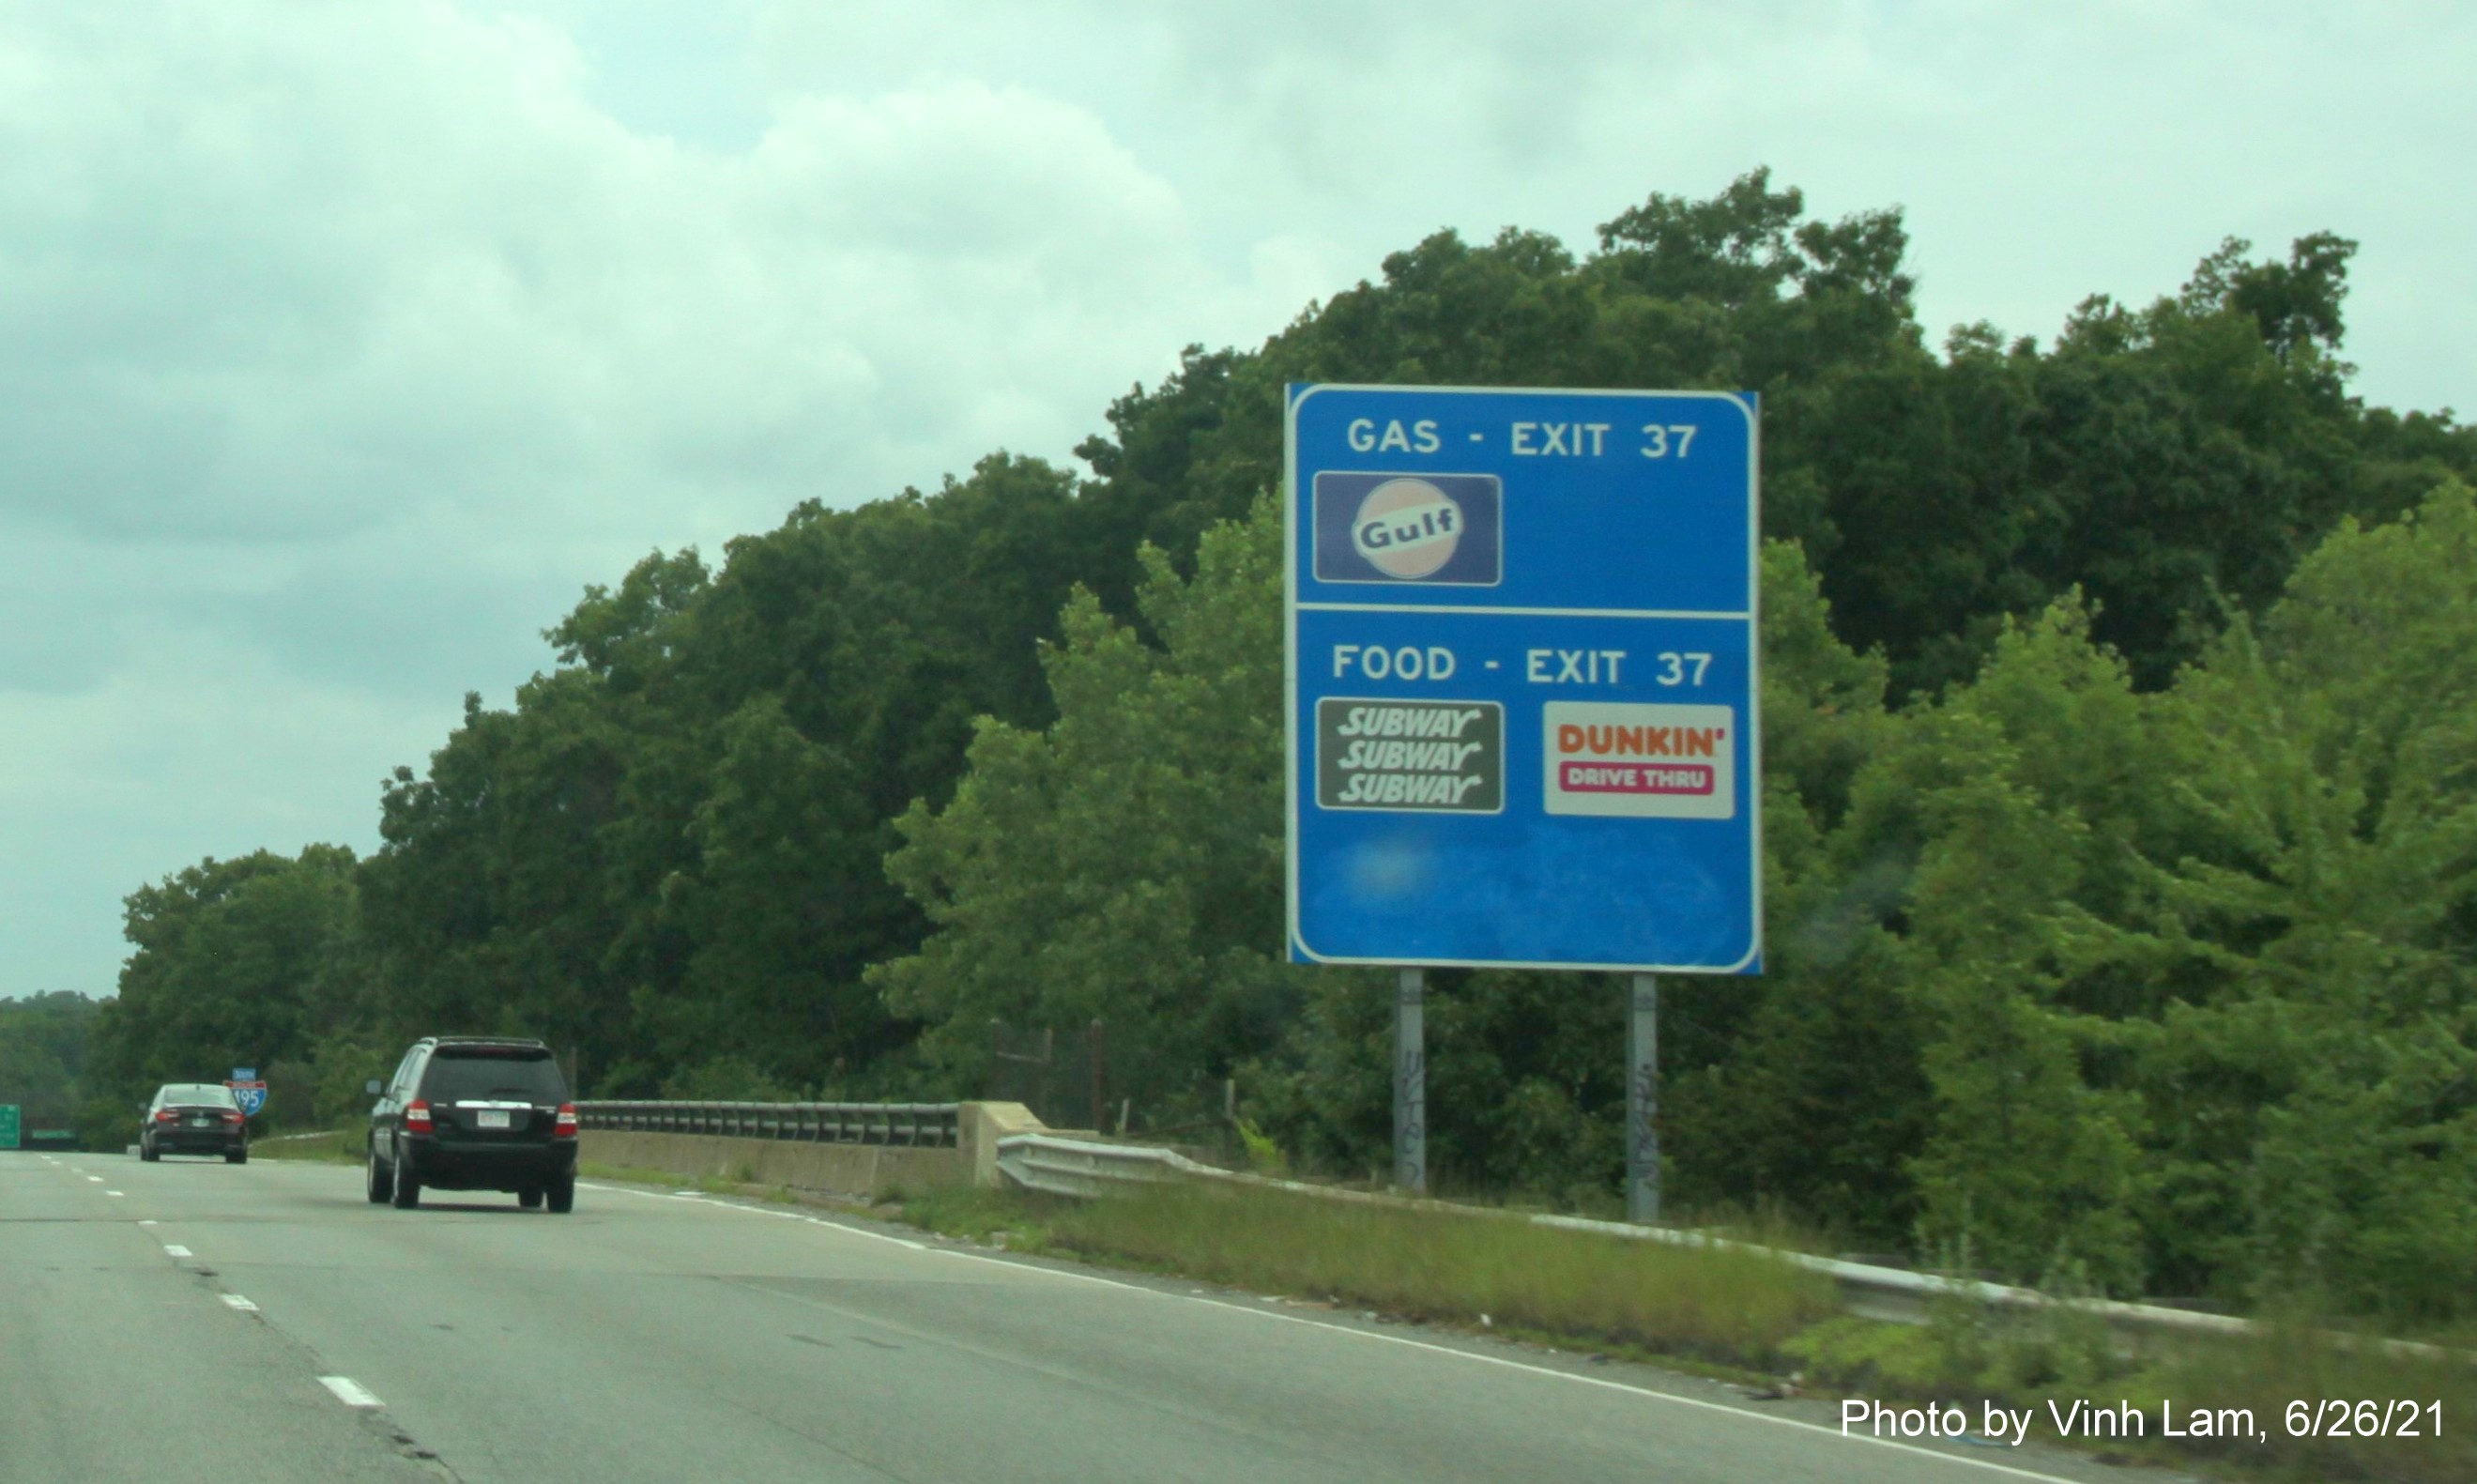 Image of blue combination Gas and Food services sign for Woburn Street exit with old sequential exit number on I-495 South in Tewksbury, by Vinh Lam, June 2021